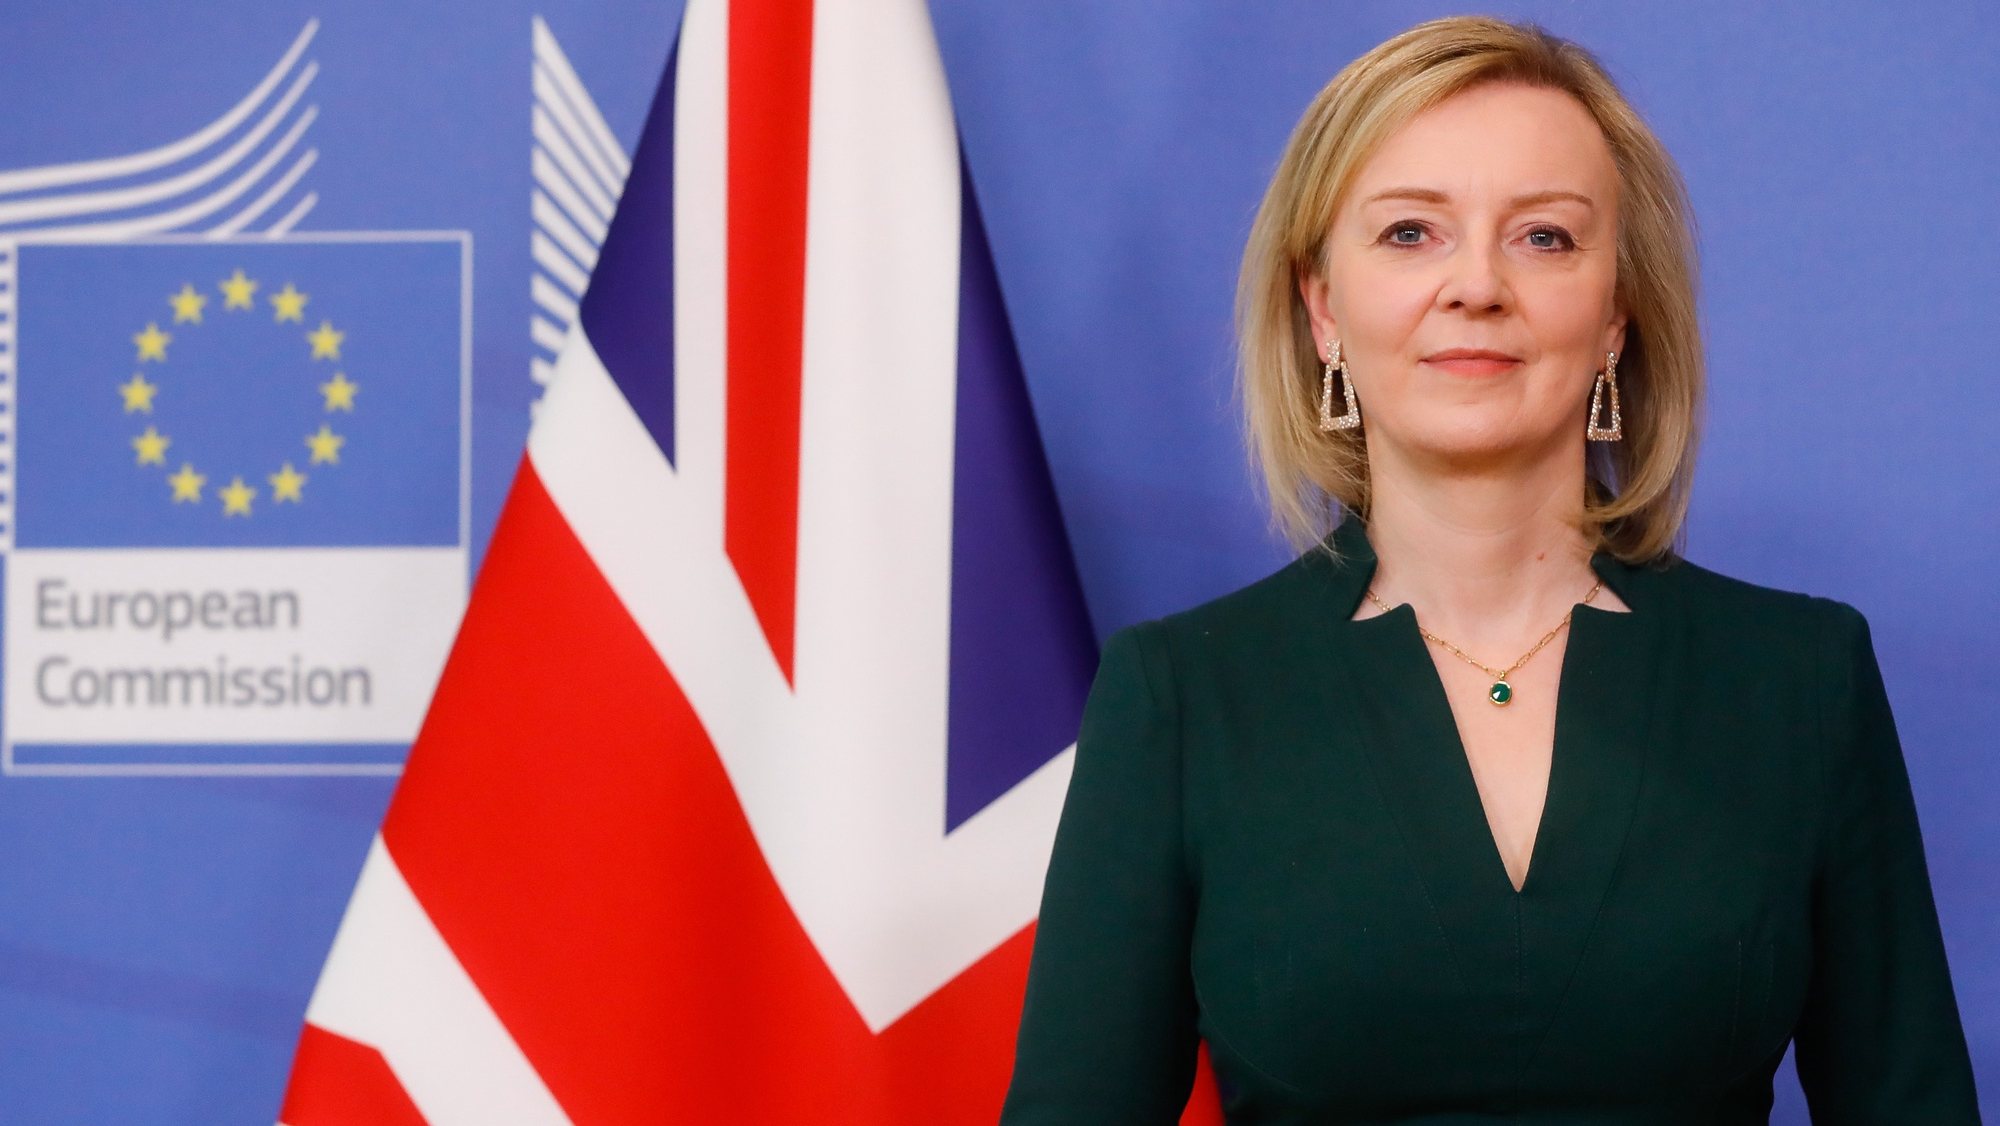 epa09775632 UK Foreign Secretary Liz Truss poses for a photo ahead of a EU-UK Joint Committee meeting at the European Commission  in Brussels, Belgium, 21 February 2022.  EPA/STEPHANIE LECOCQ